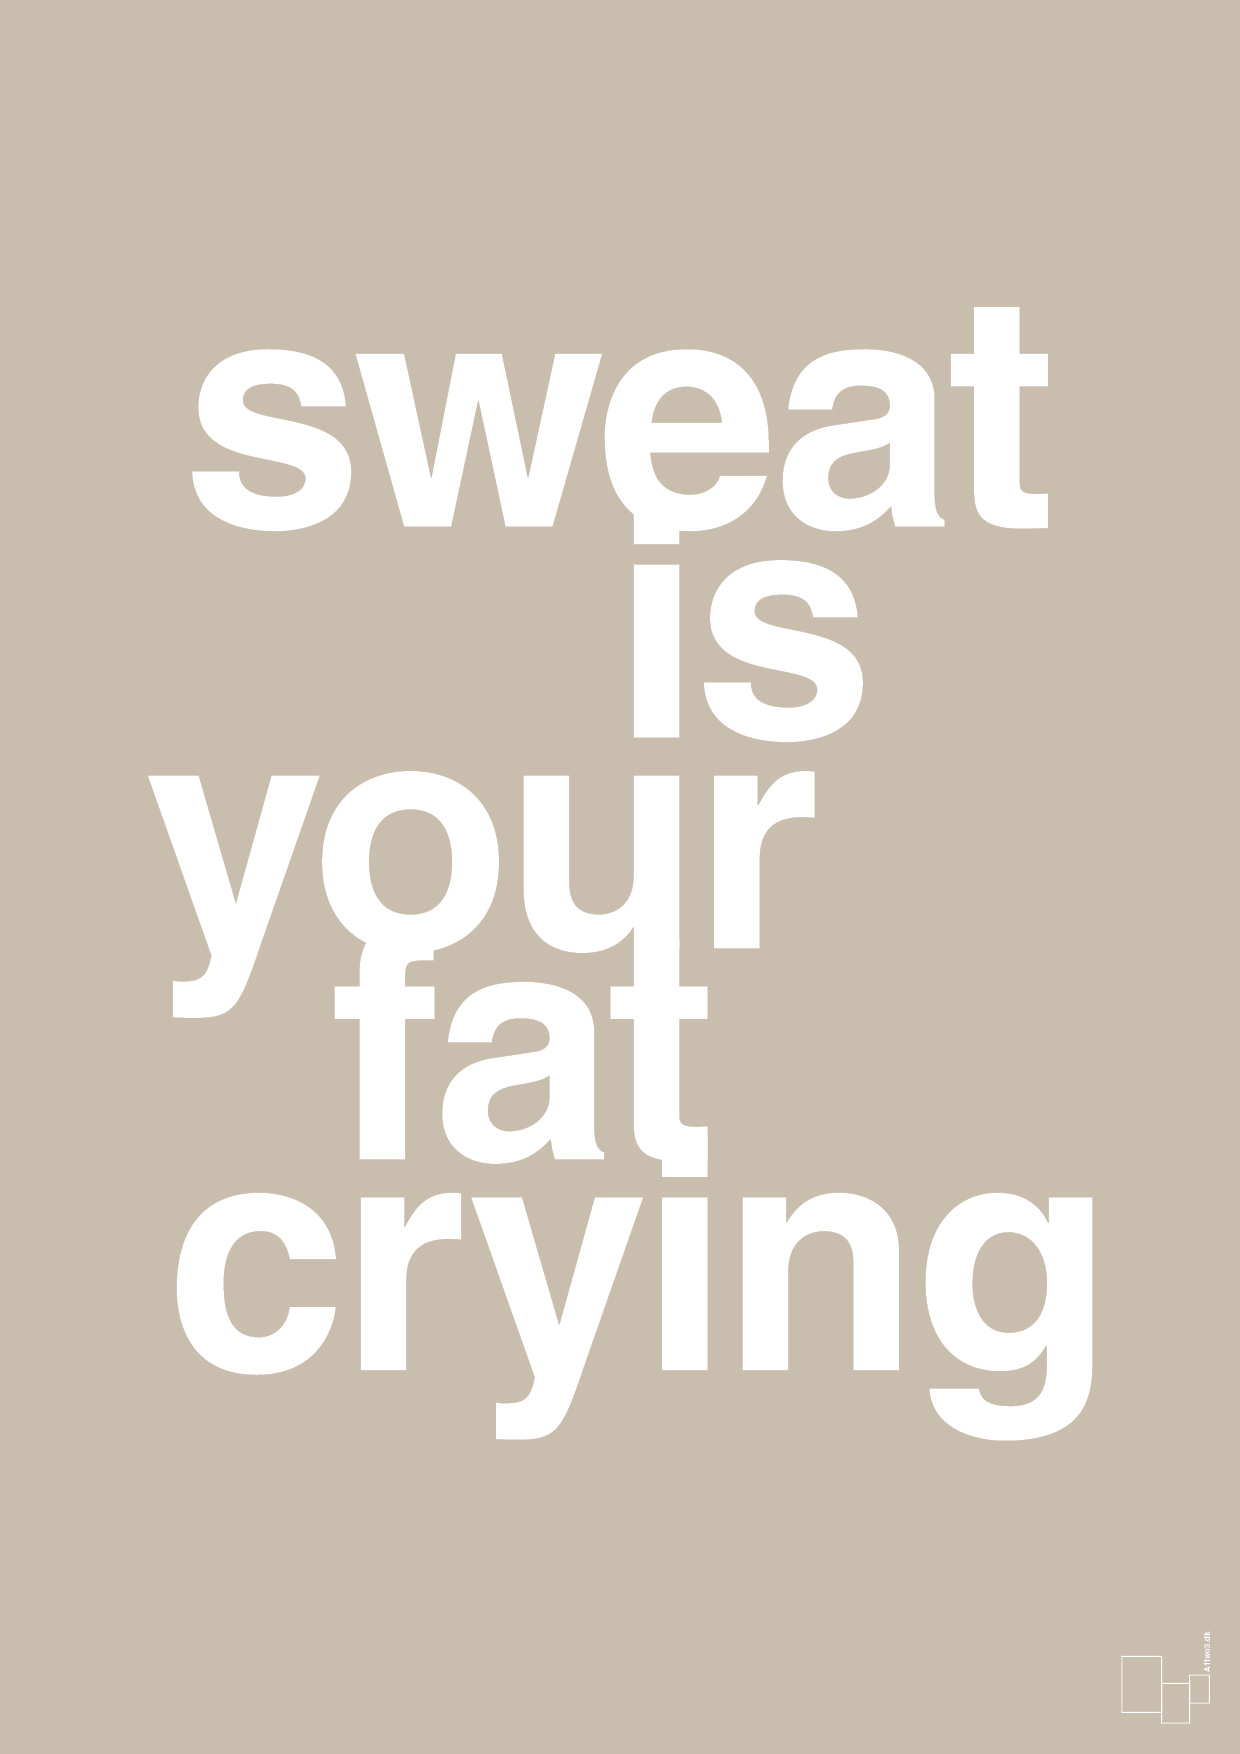 sweat is your fat crying - Plakat med Sport & Fritid i Creamy Mushroom